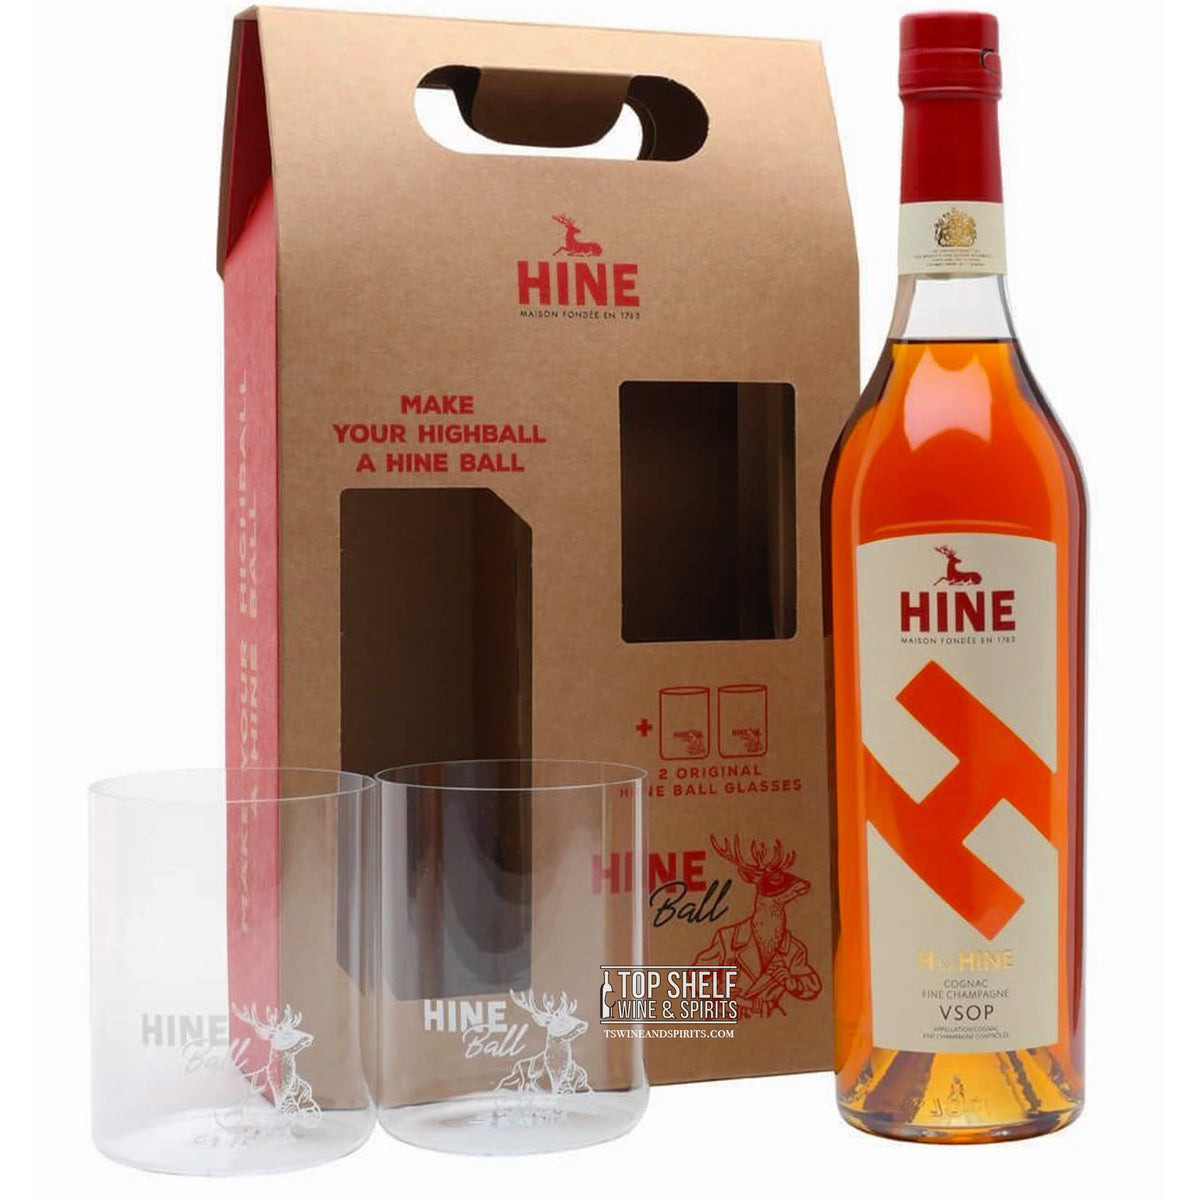 Hennessy X.O. Cognac with Glasses  prices, stores, tasting notes